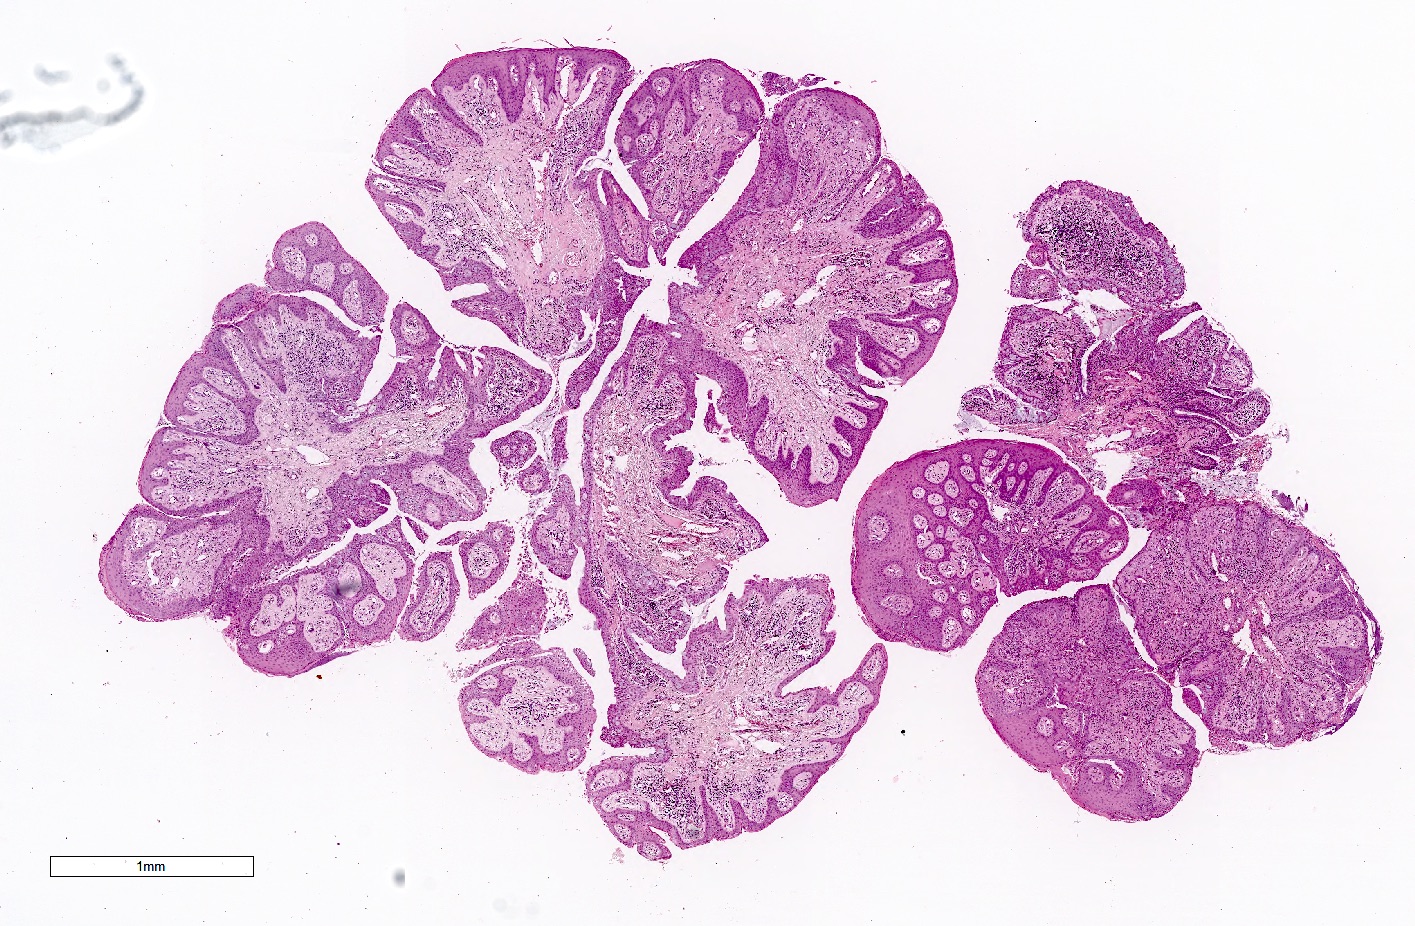 Finger-like projections of the neoplastic process